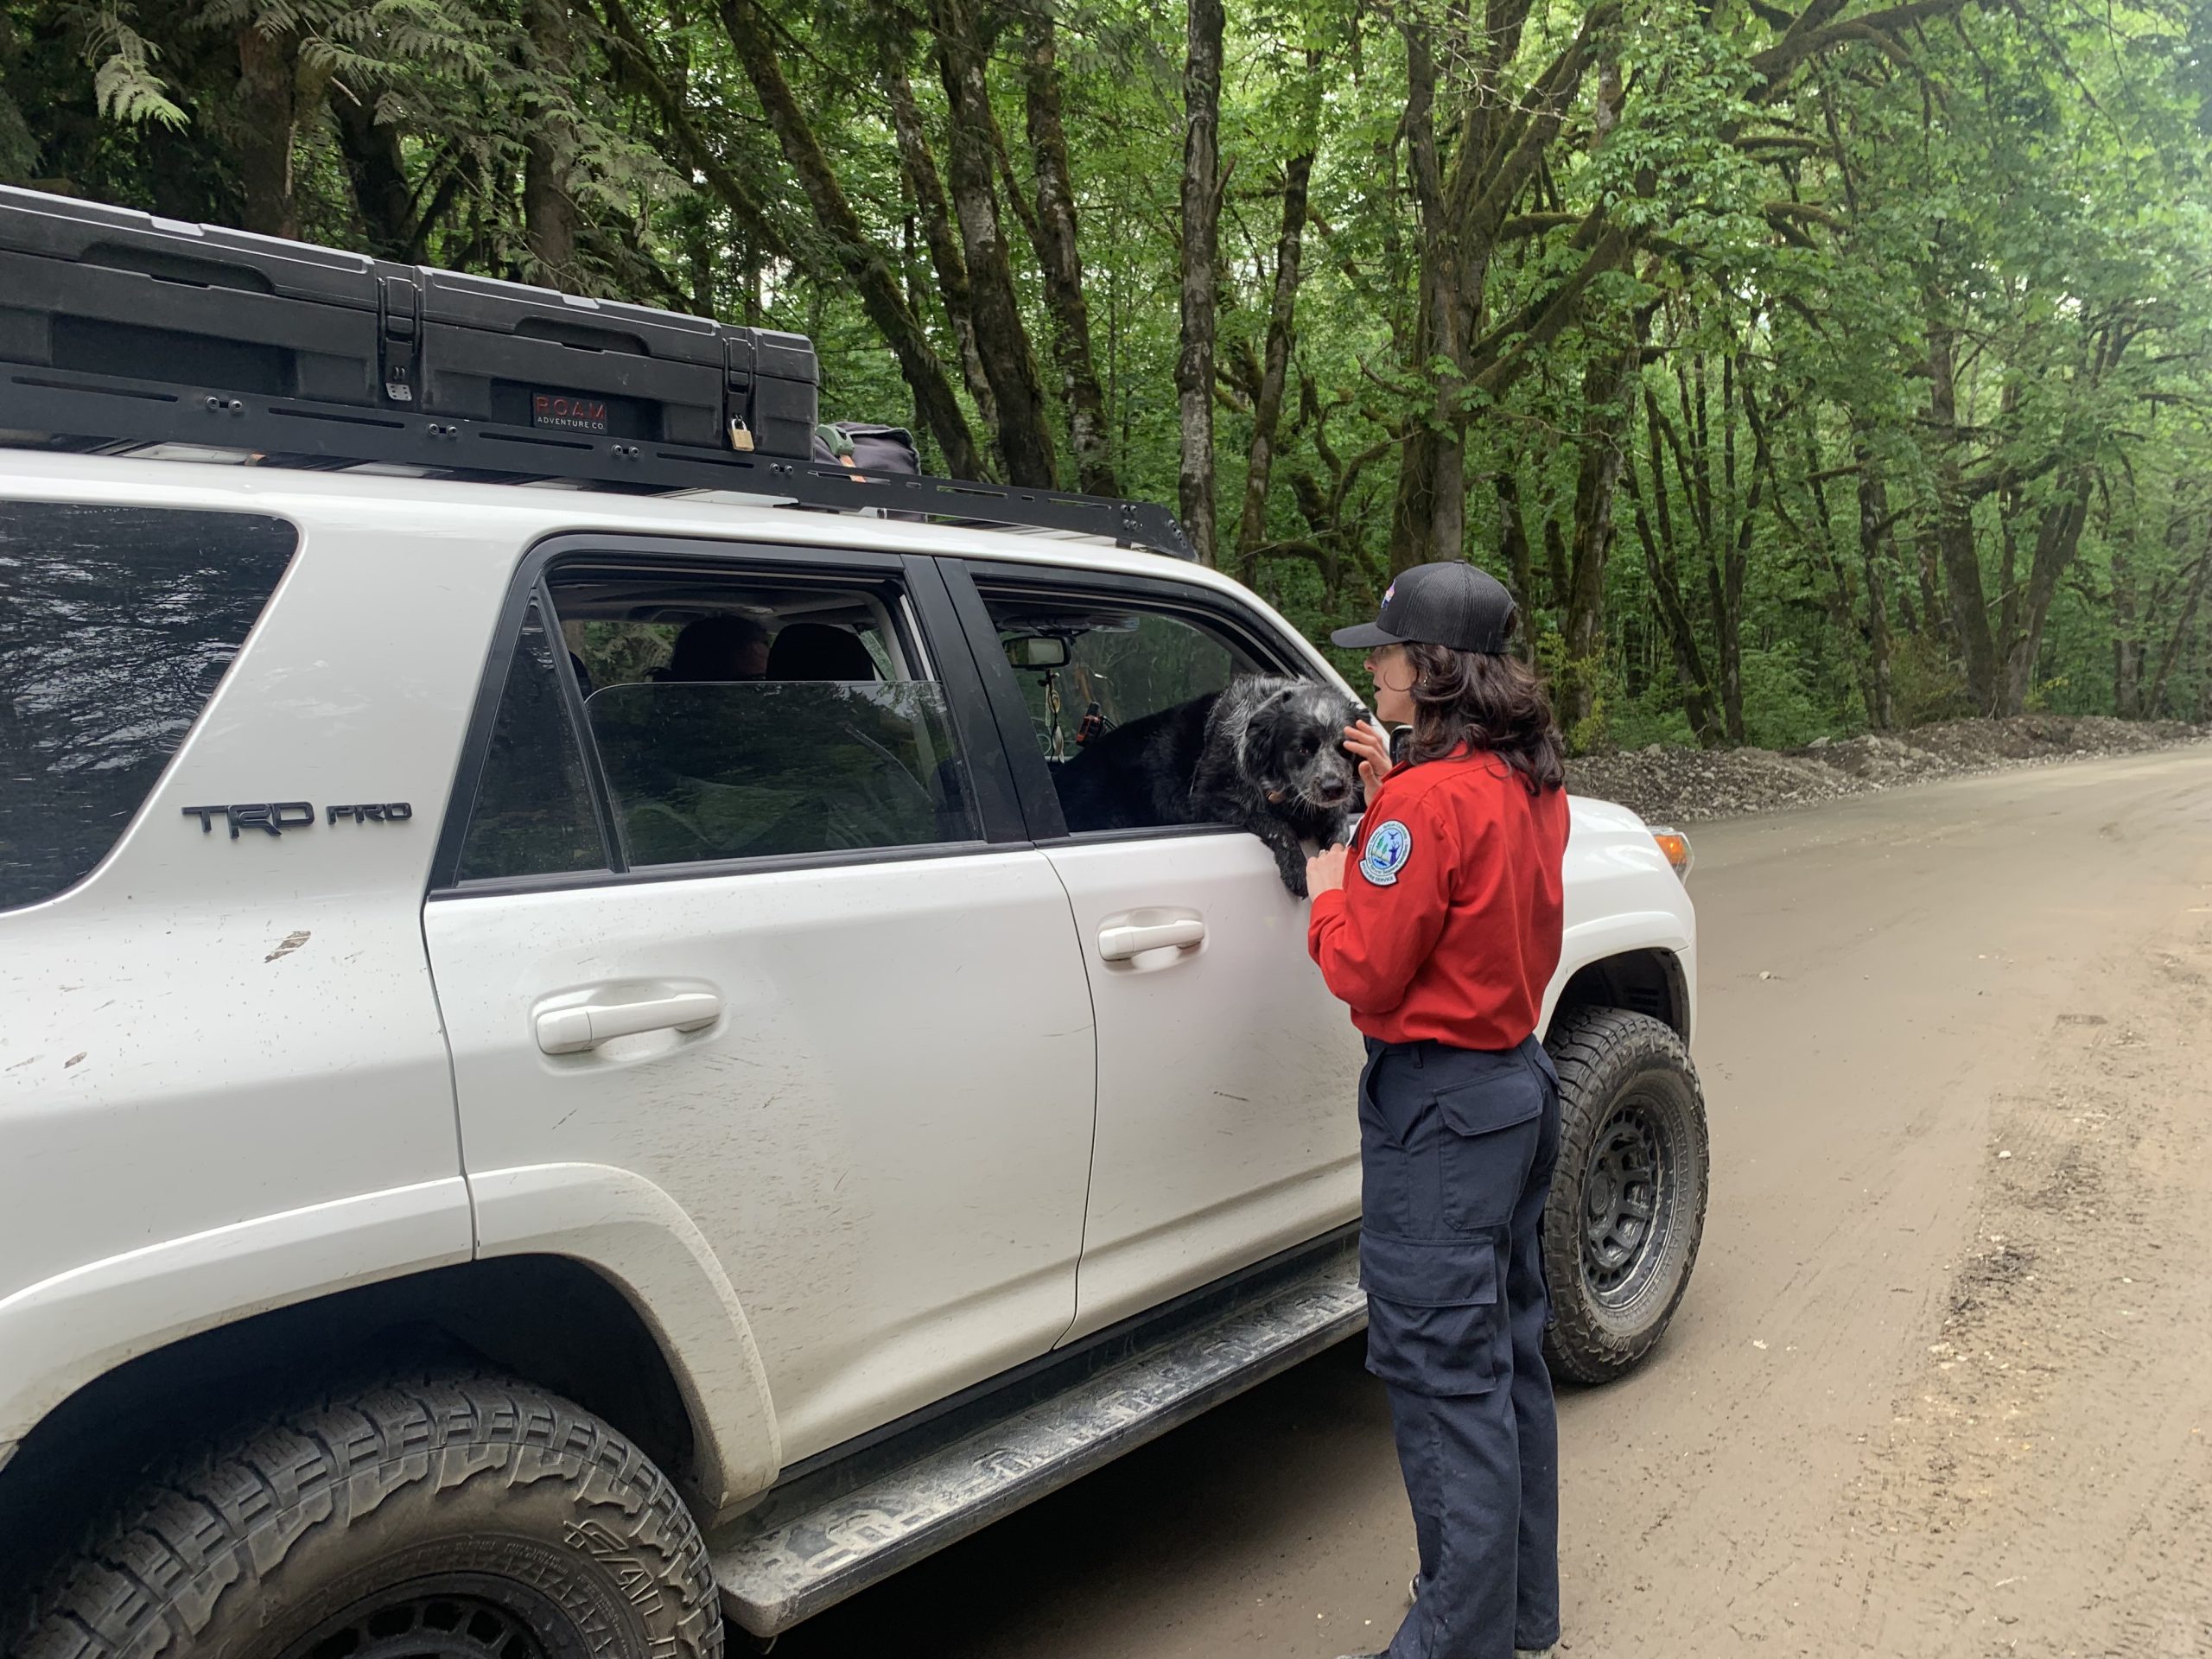 A BC Wildfire Service staff member wearing the official reds and blues uniform addresses a driver of an SUV and their dog.